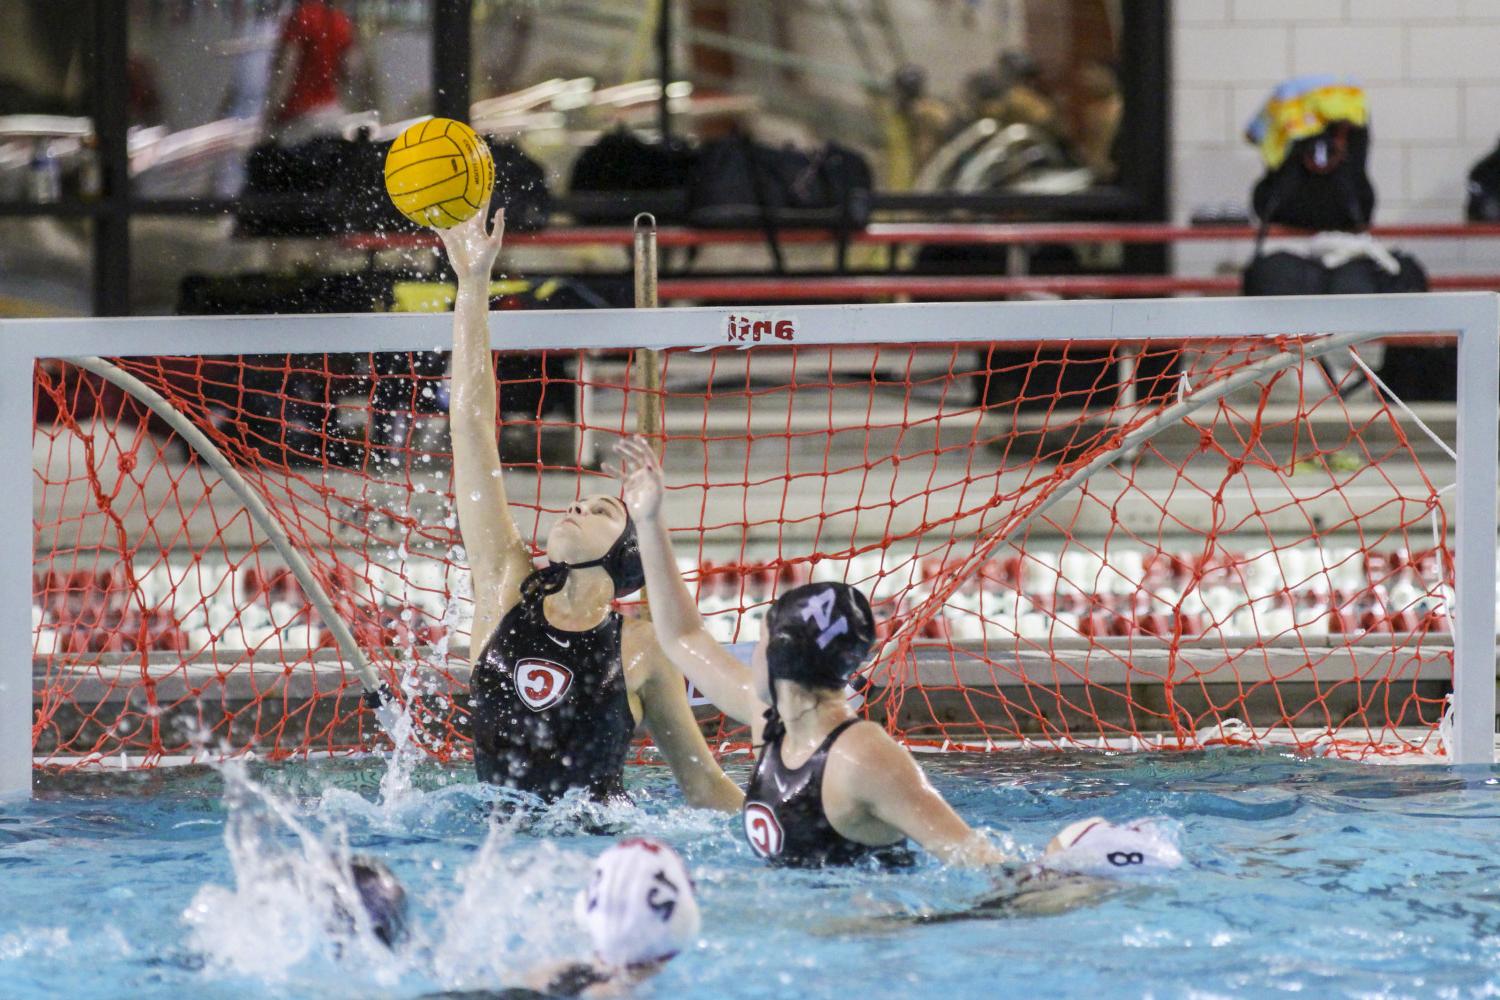 Carthage College student athletes compete in a water polo tournament on campus.